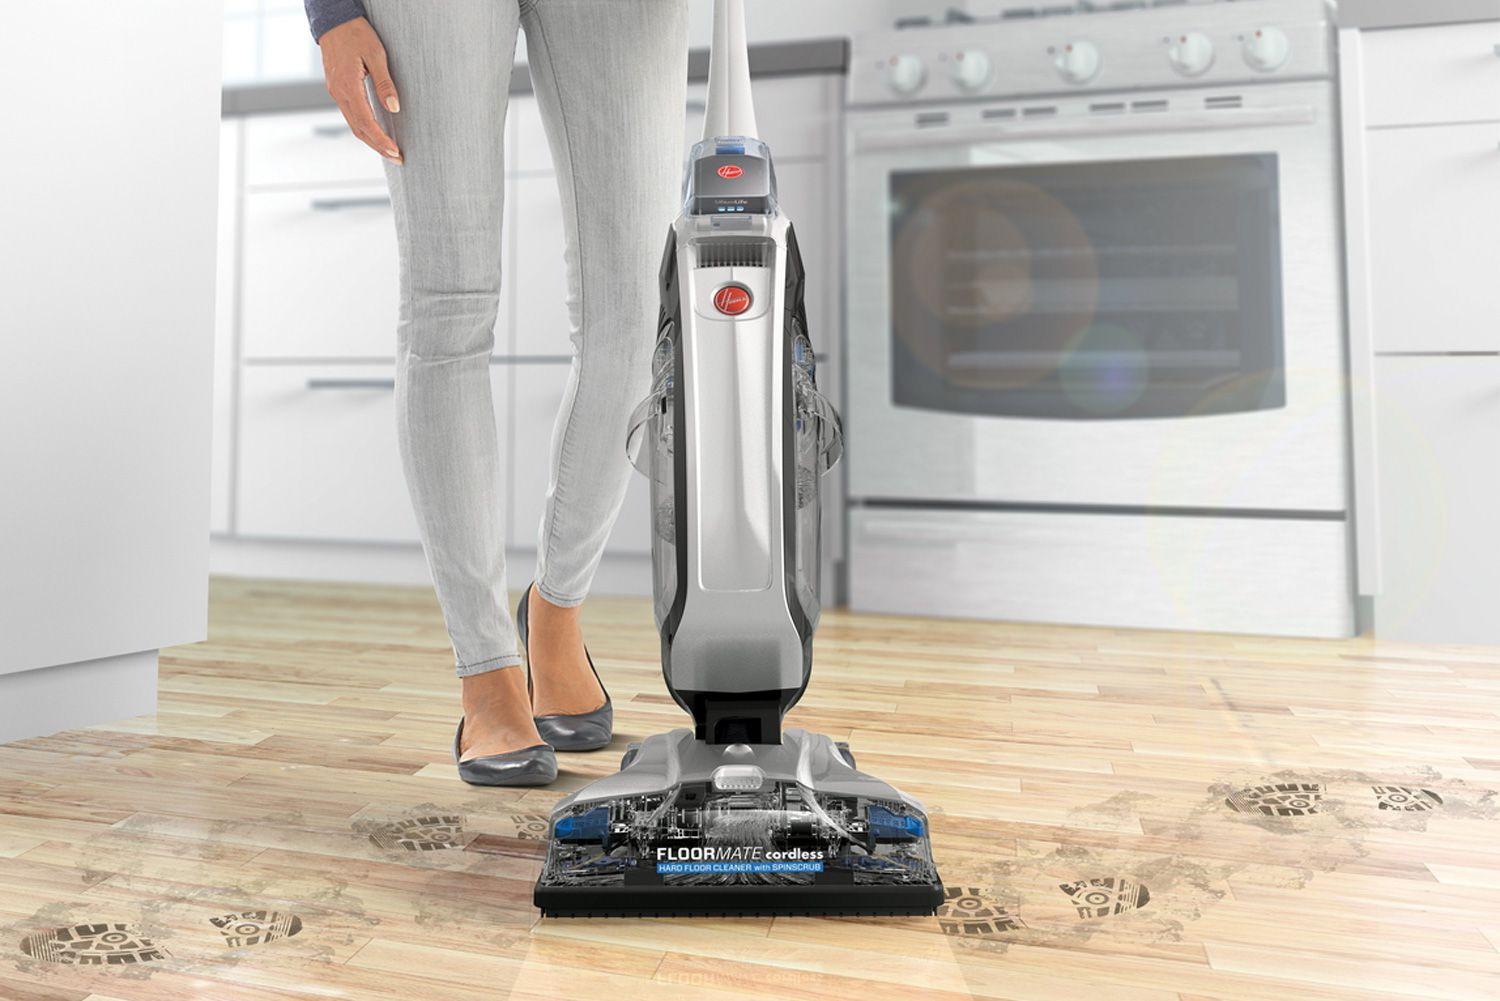 hardwood floor steam cleaners consumer reports of hoover floormate cleaner review with hoover floormate 59a452af685fbe00102f4ce0